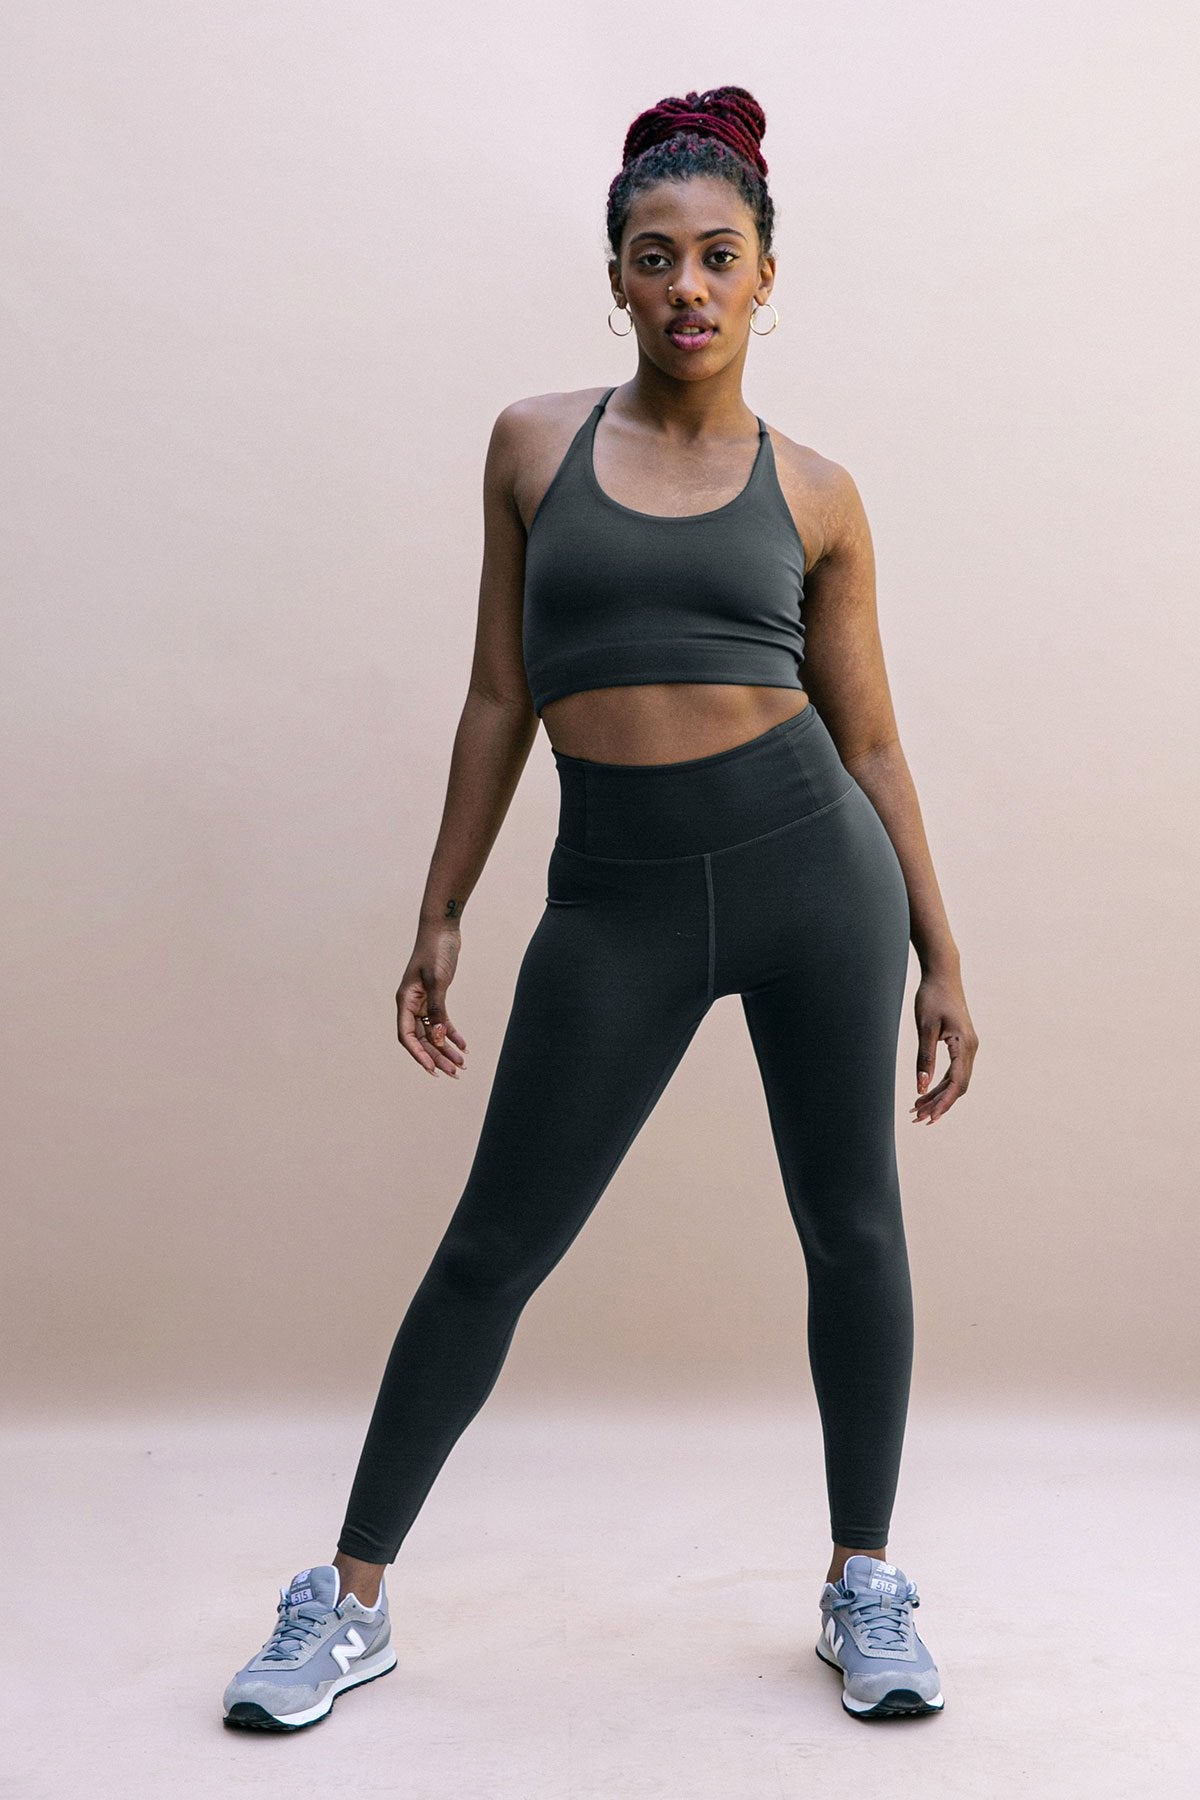 Girlfriend Collective Black Friday 2020 Sale - 50 Percent Off Leggings